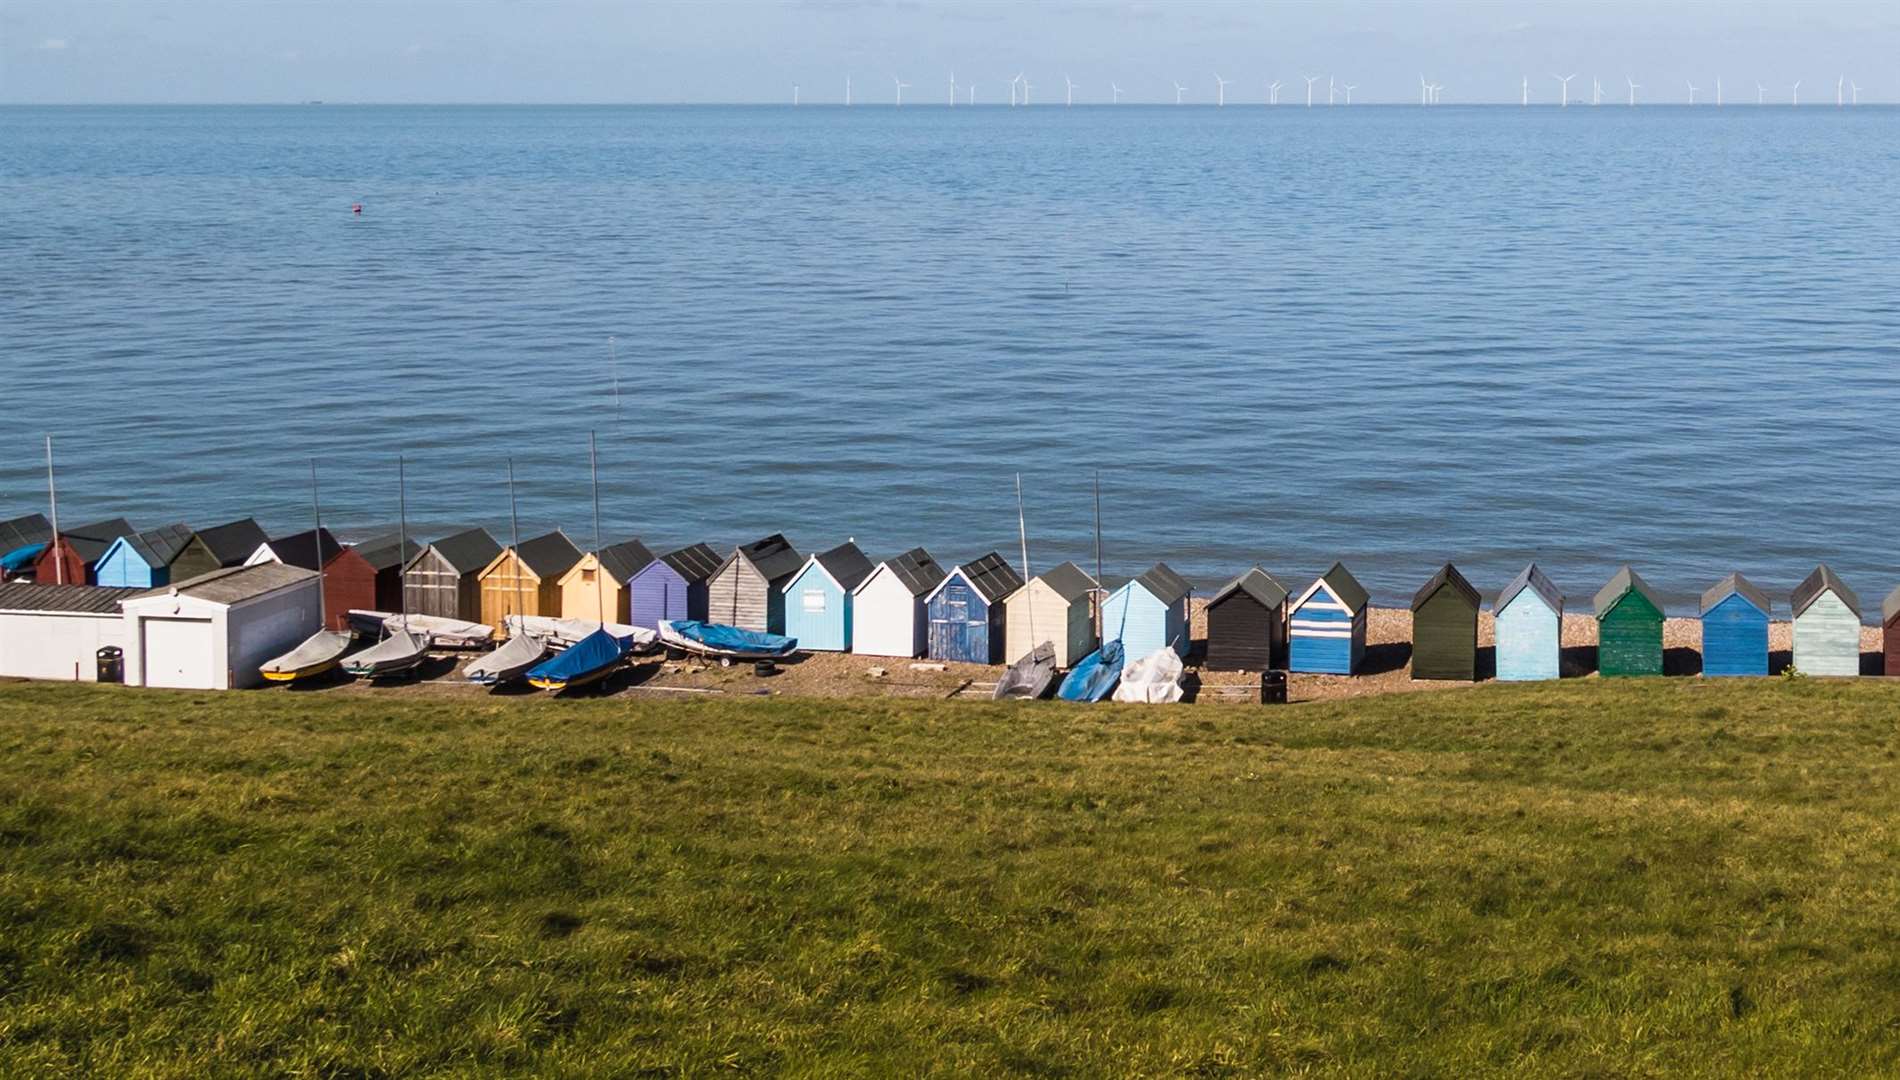 A total of 94 beach huts will be erected across two sites on the Herne Bay coast